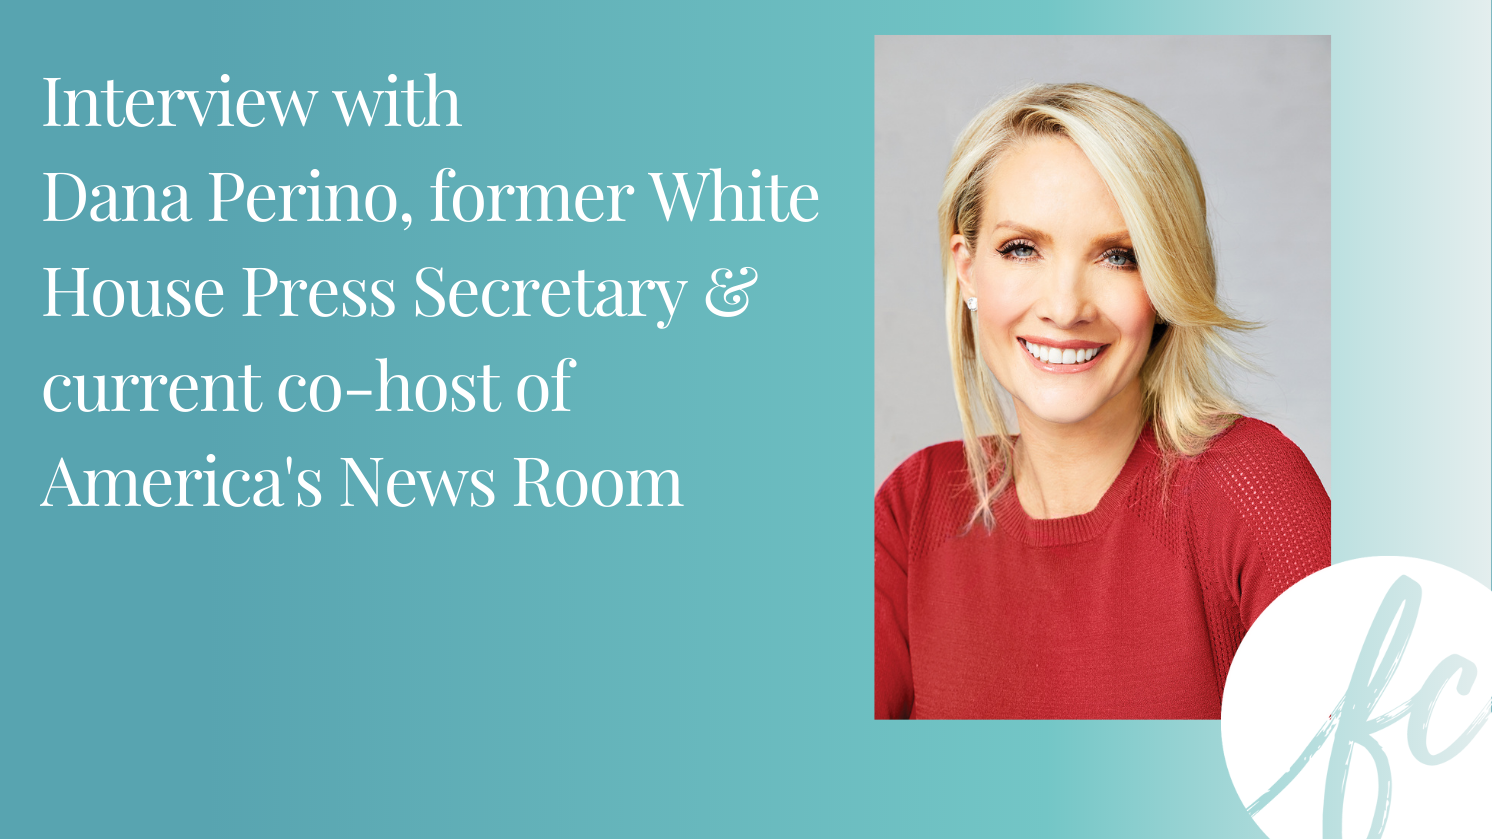 Dana Perino New Book Signed Pin On Other Faves The Daily Briefing The Best Porn Website